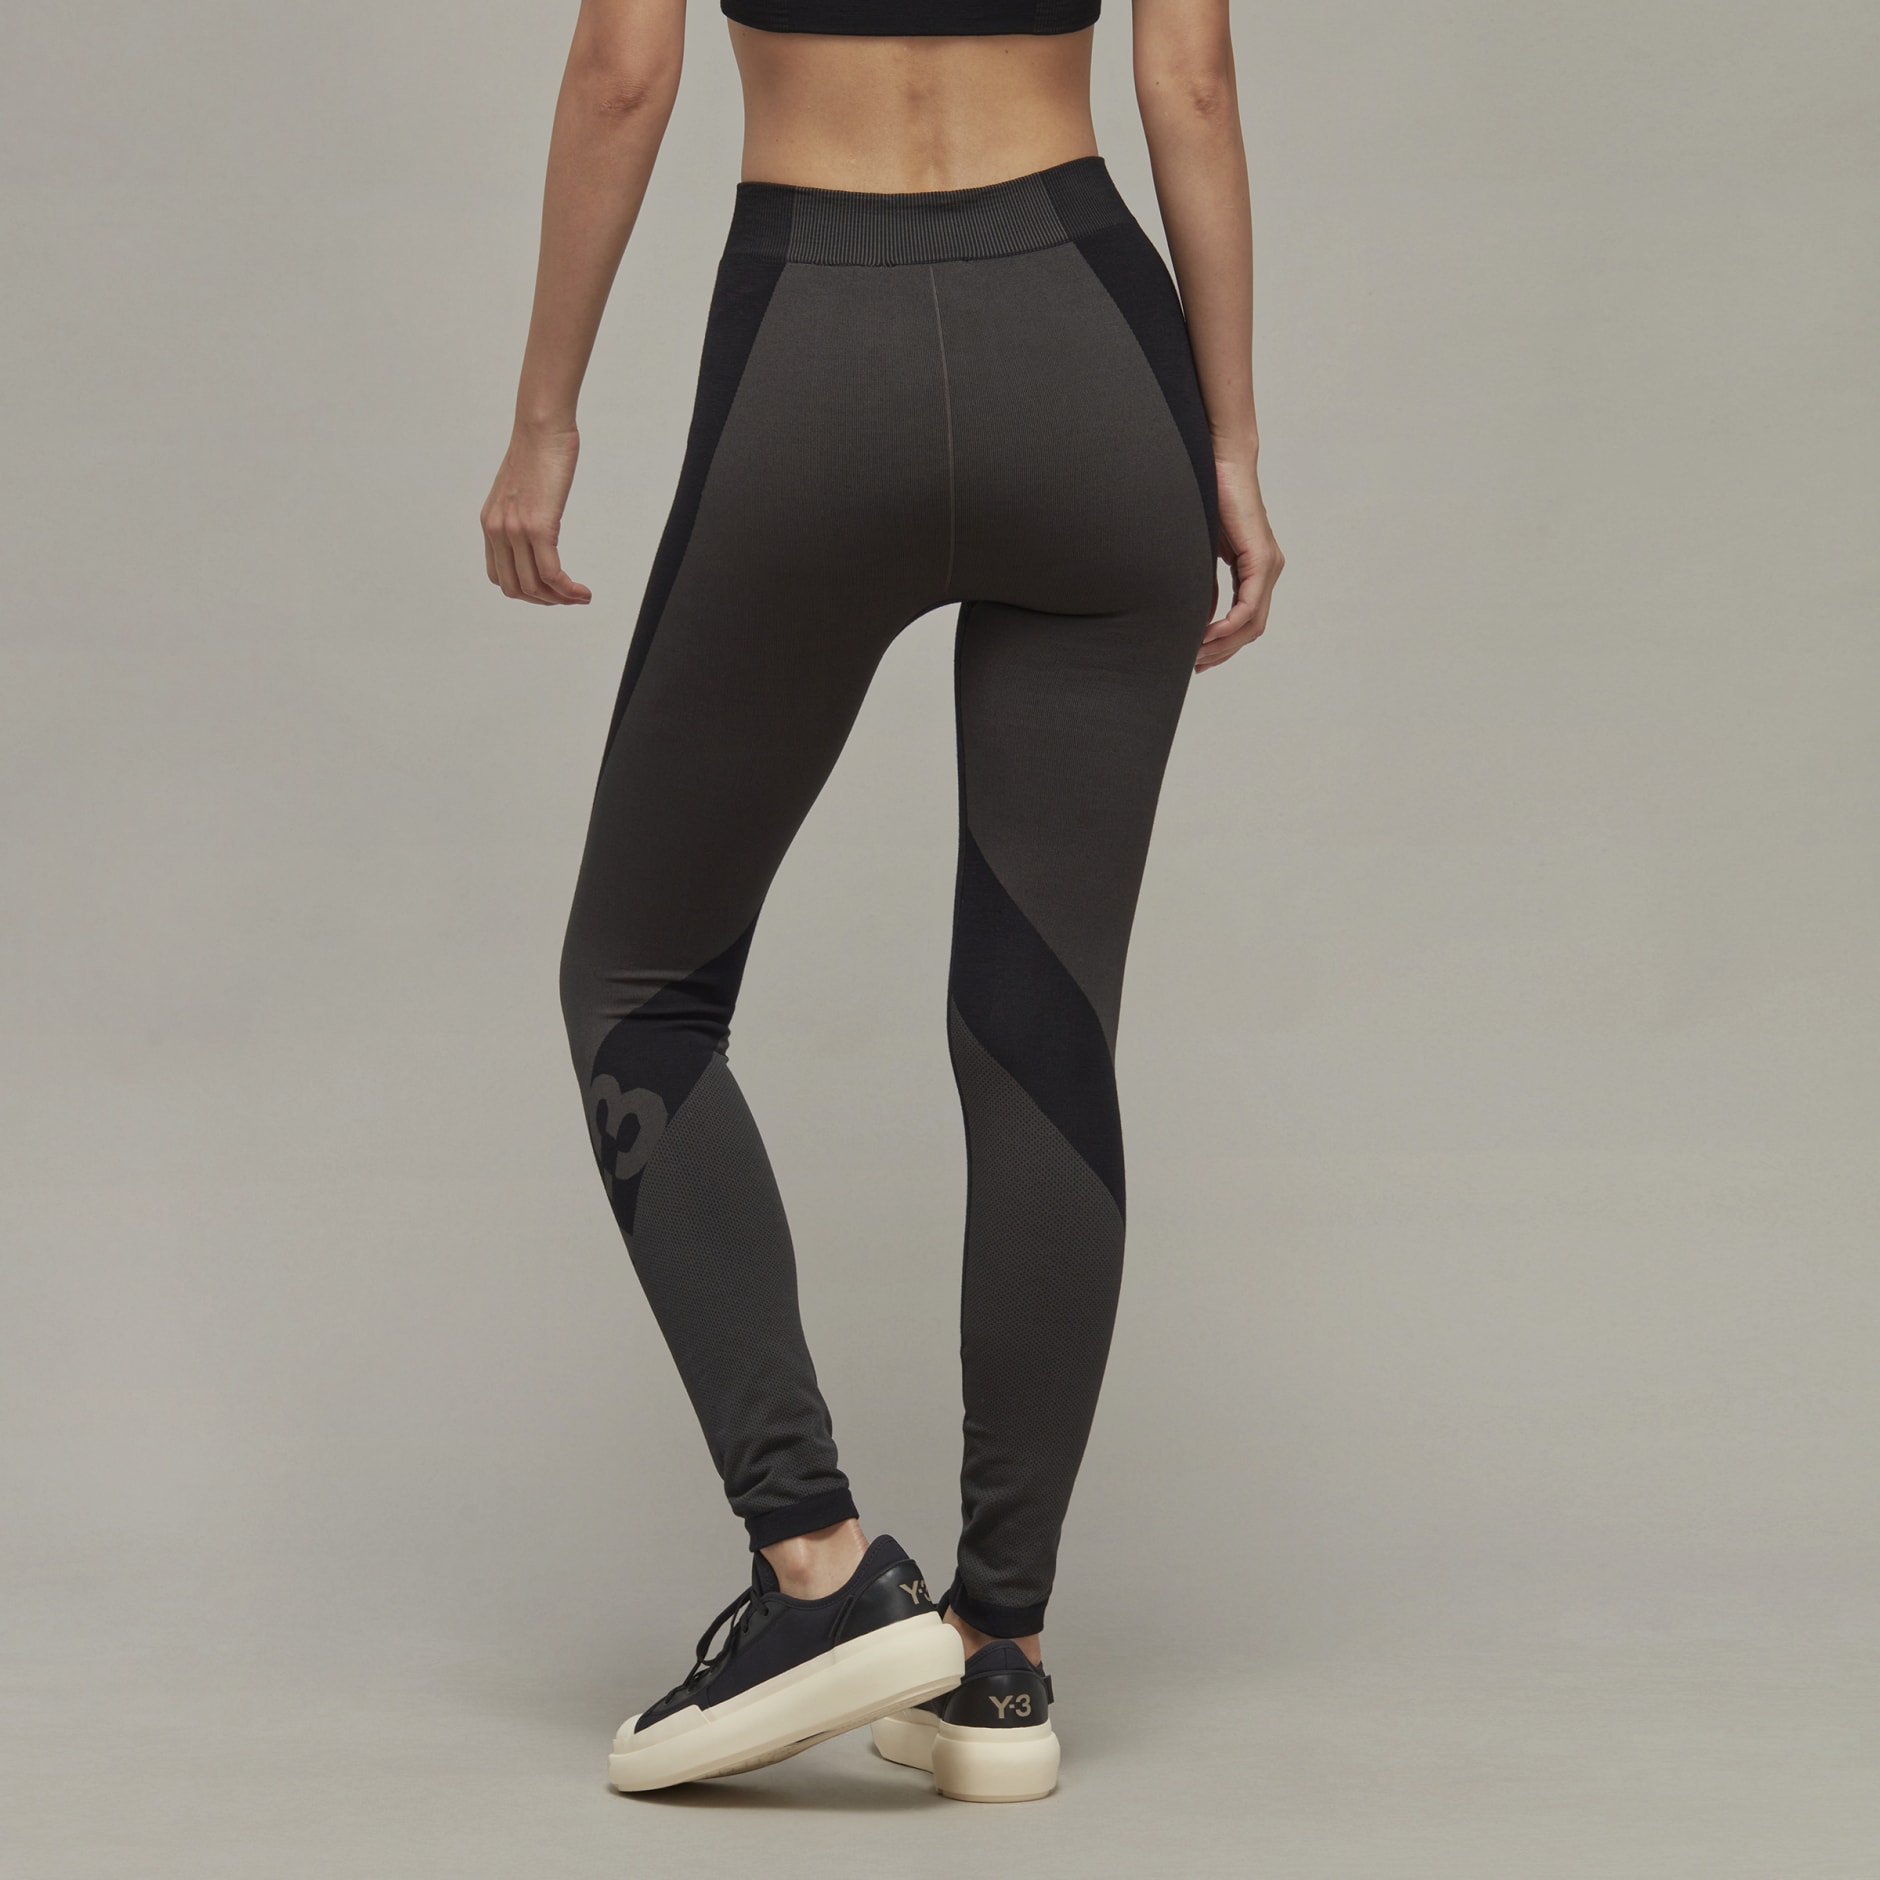 Clothing - Y-3 Classic Seamless Knit Tights - Black | adidas South